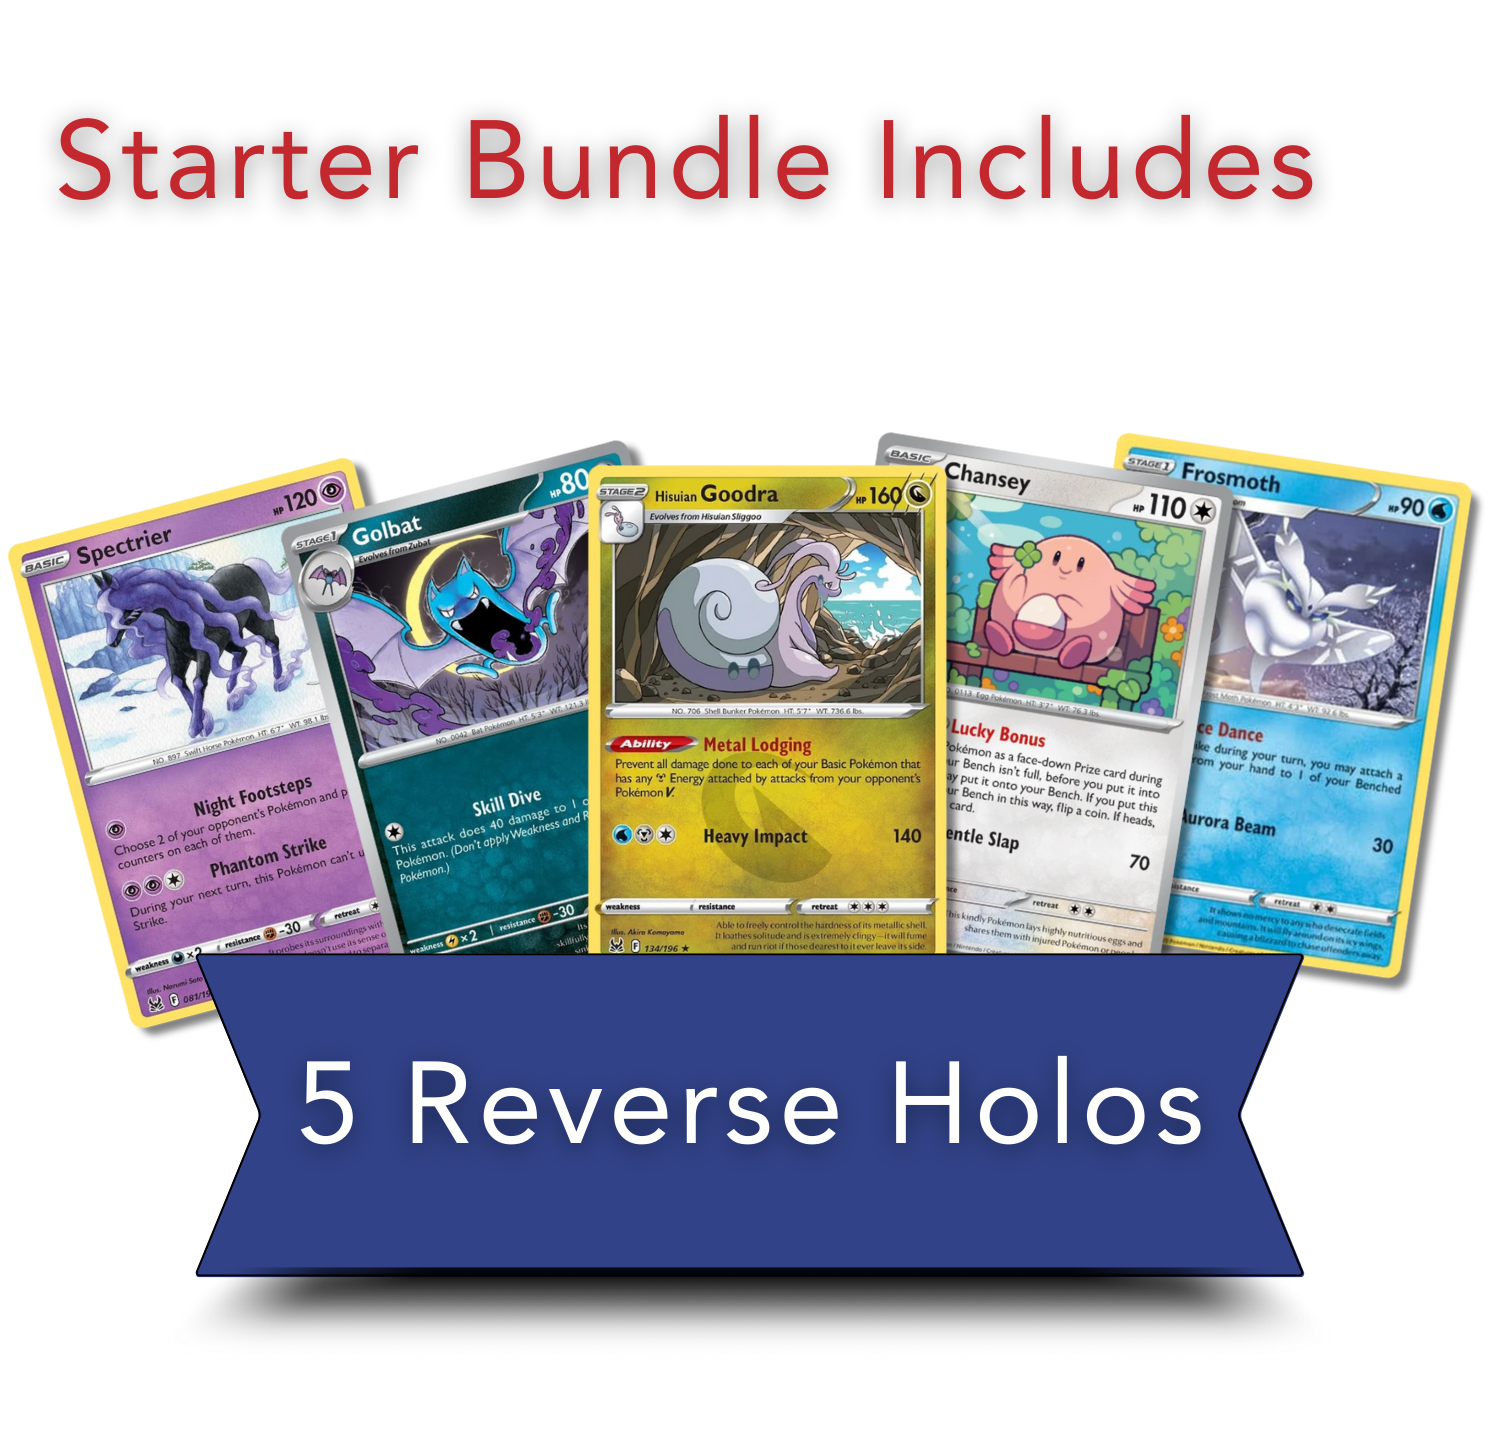 Exclusive Starter Bundle | 50 Genuine Cards | Includes 5 Guaranteed Reverse Holos | BlueProton Deck Box compatible with trading cards